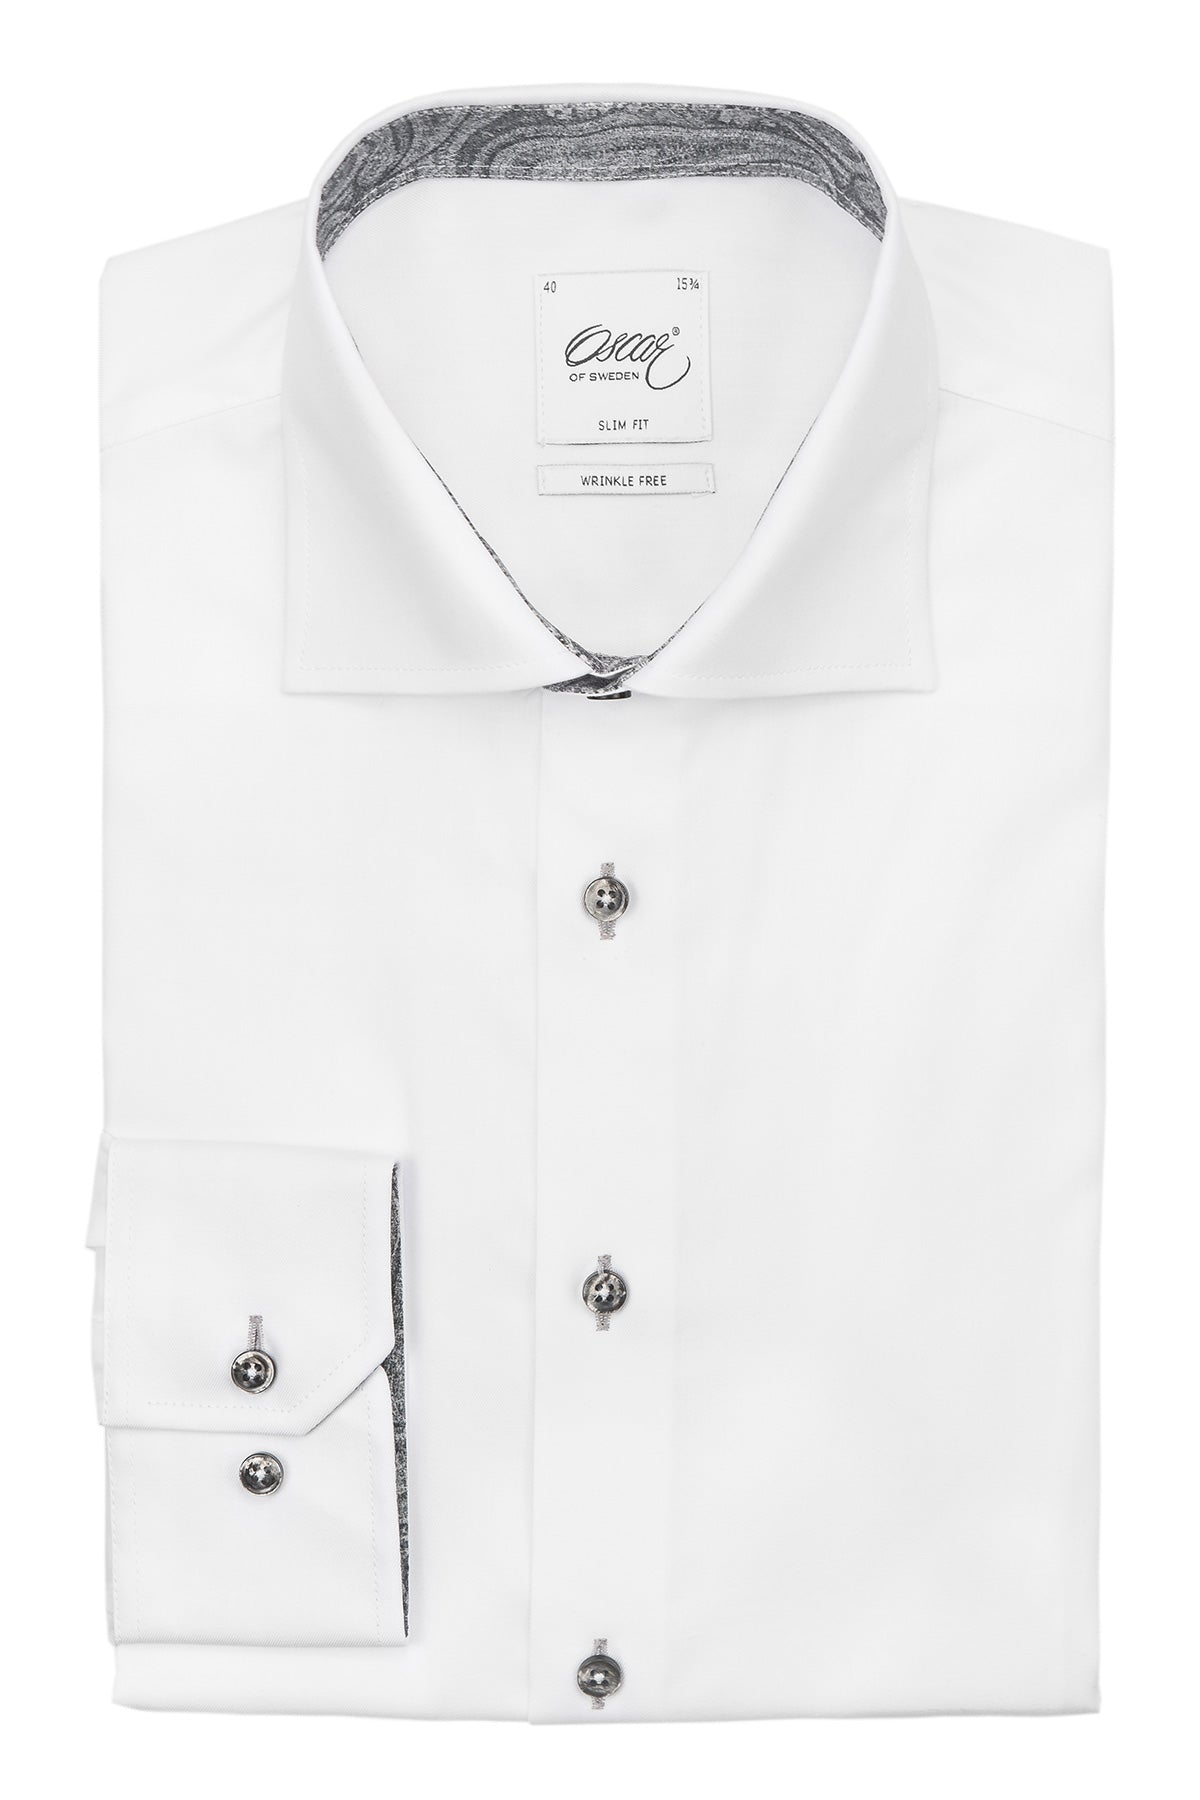 White slim fit shirt with grey contrast details